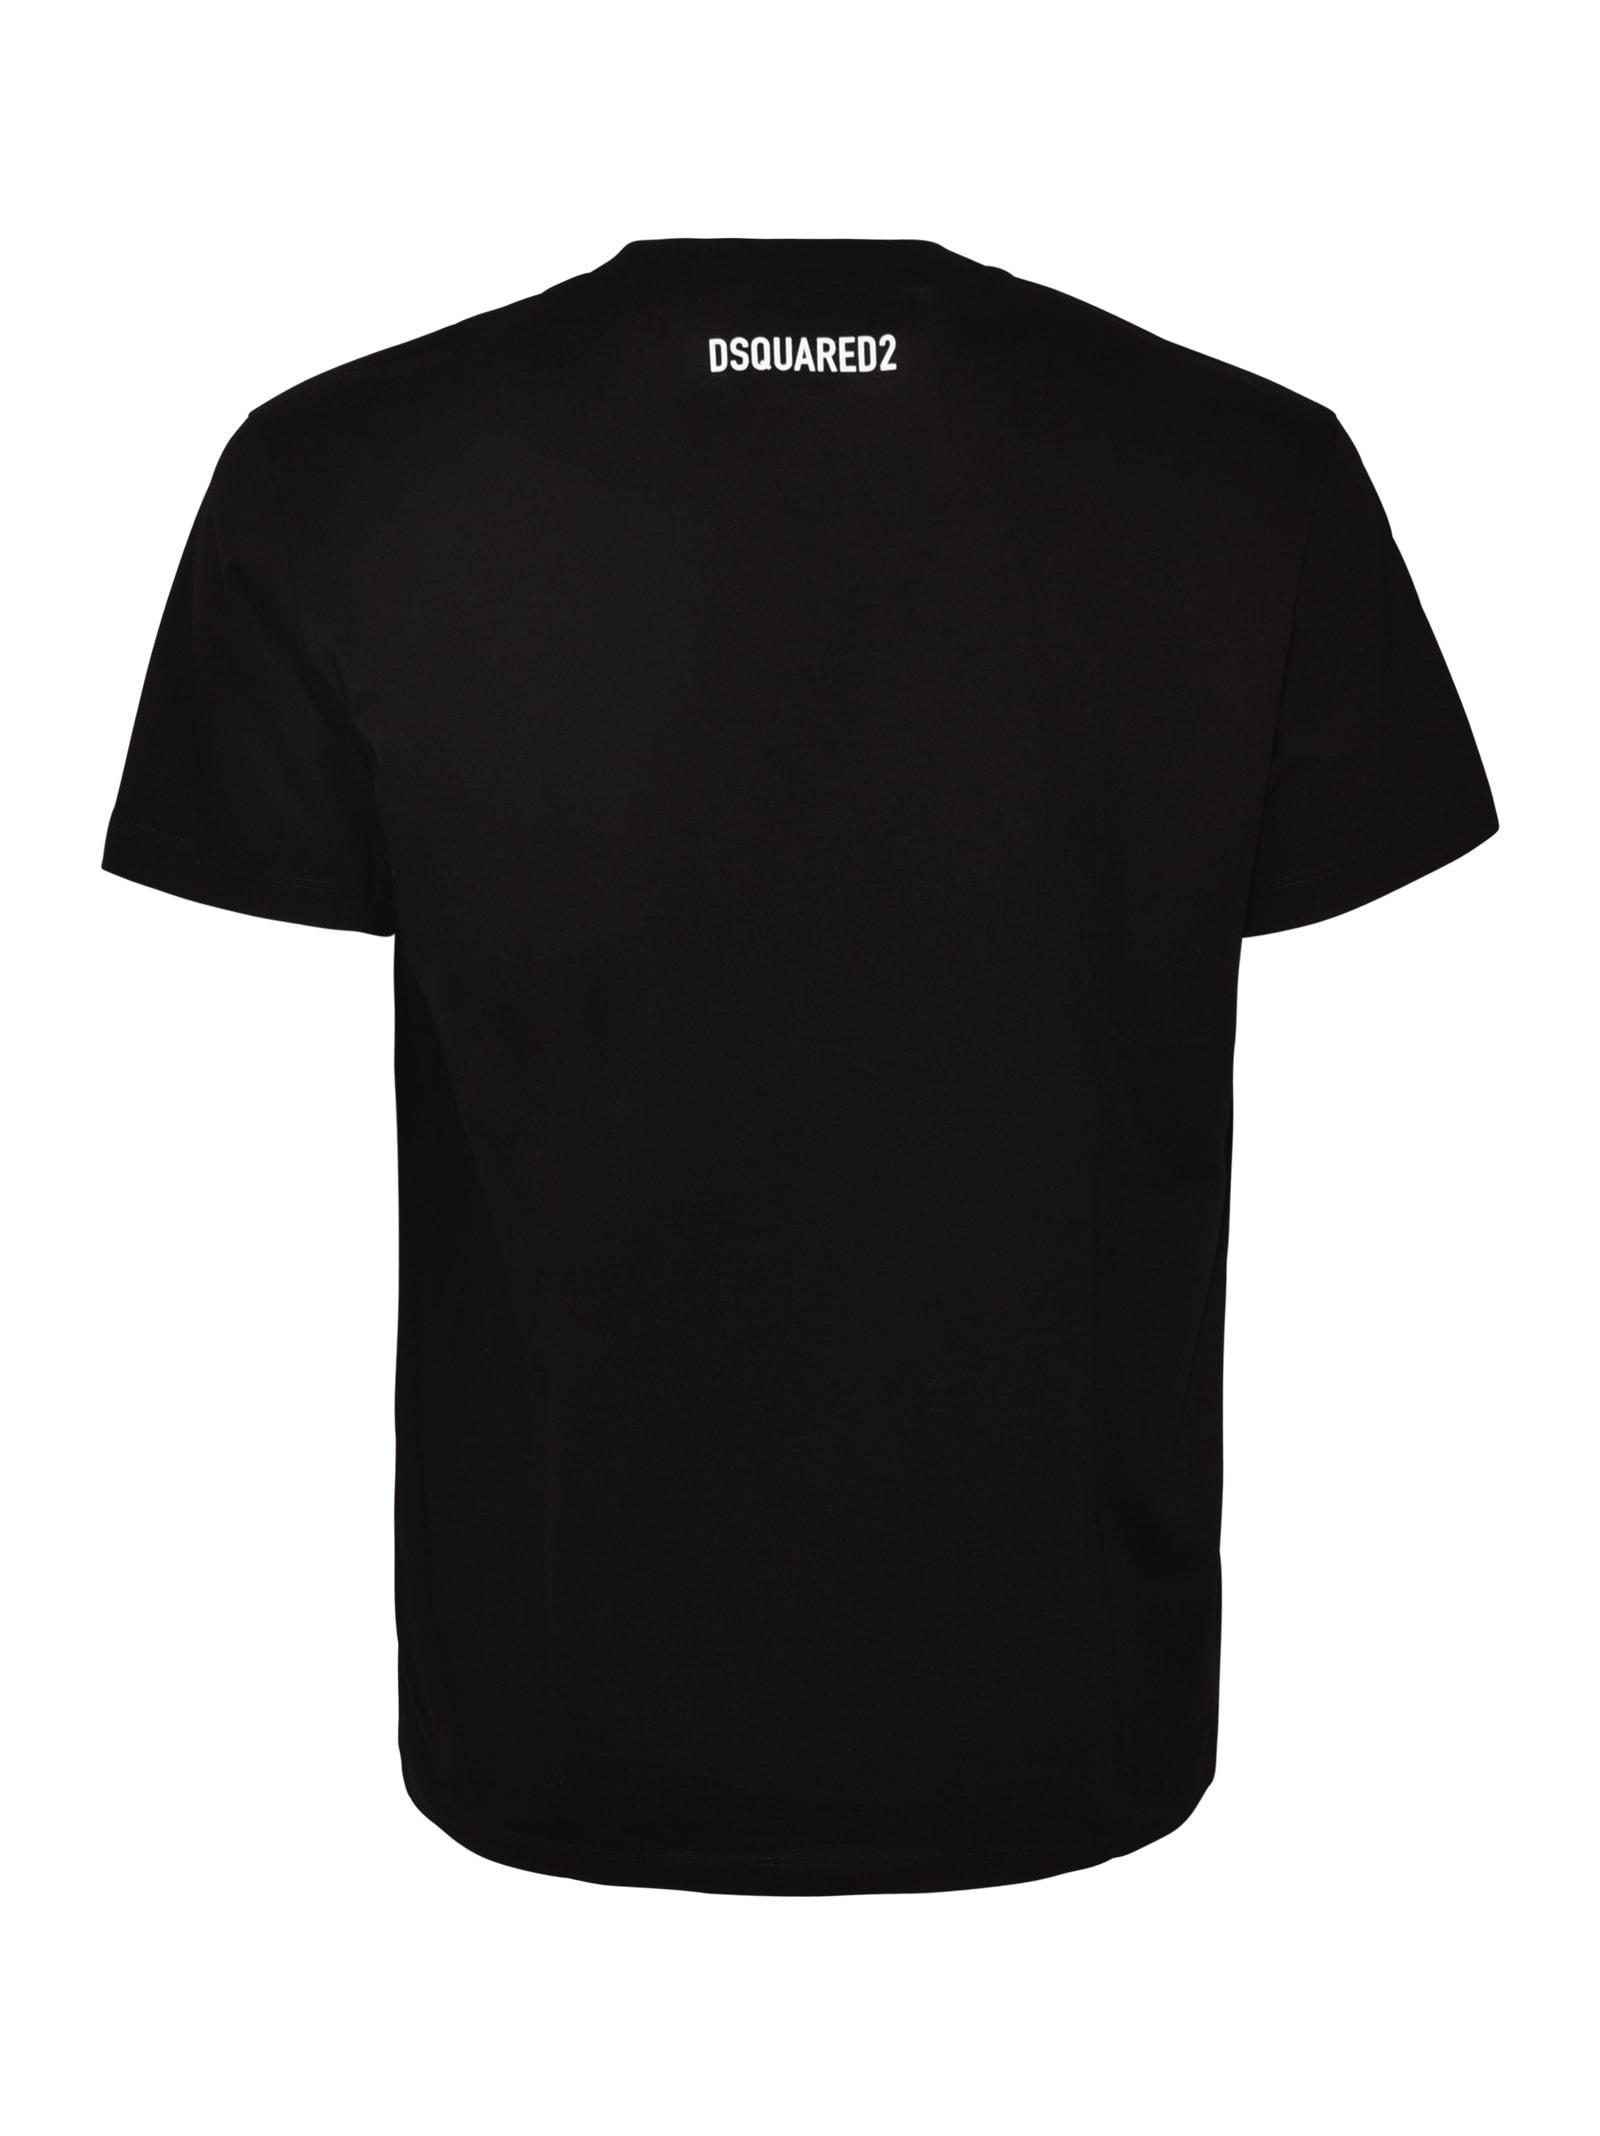 DSquared² Ciro Cool Fit T-shirt in Black for Men | Lyst